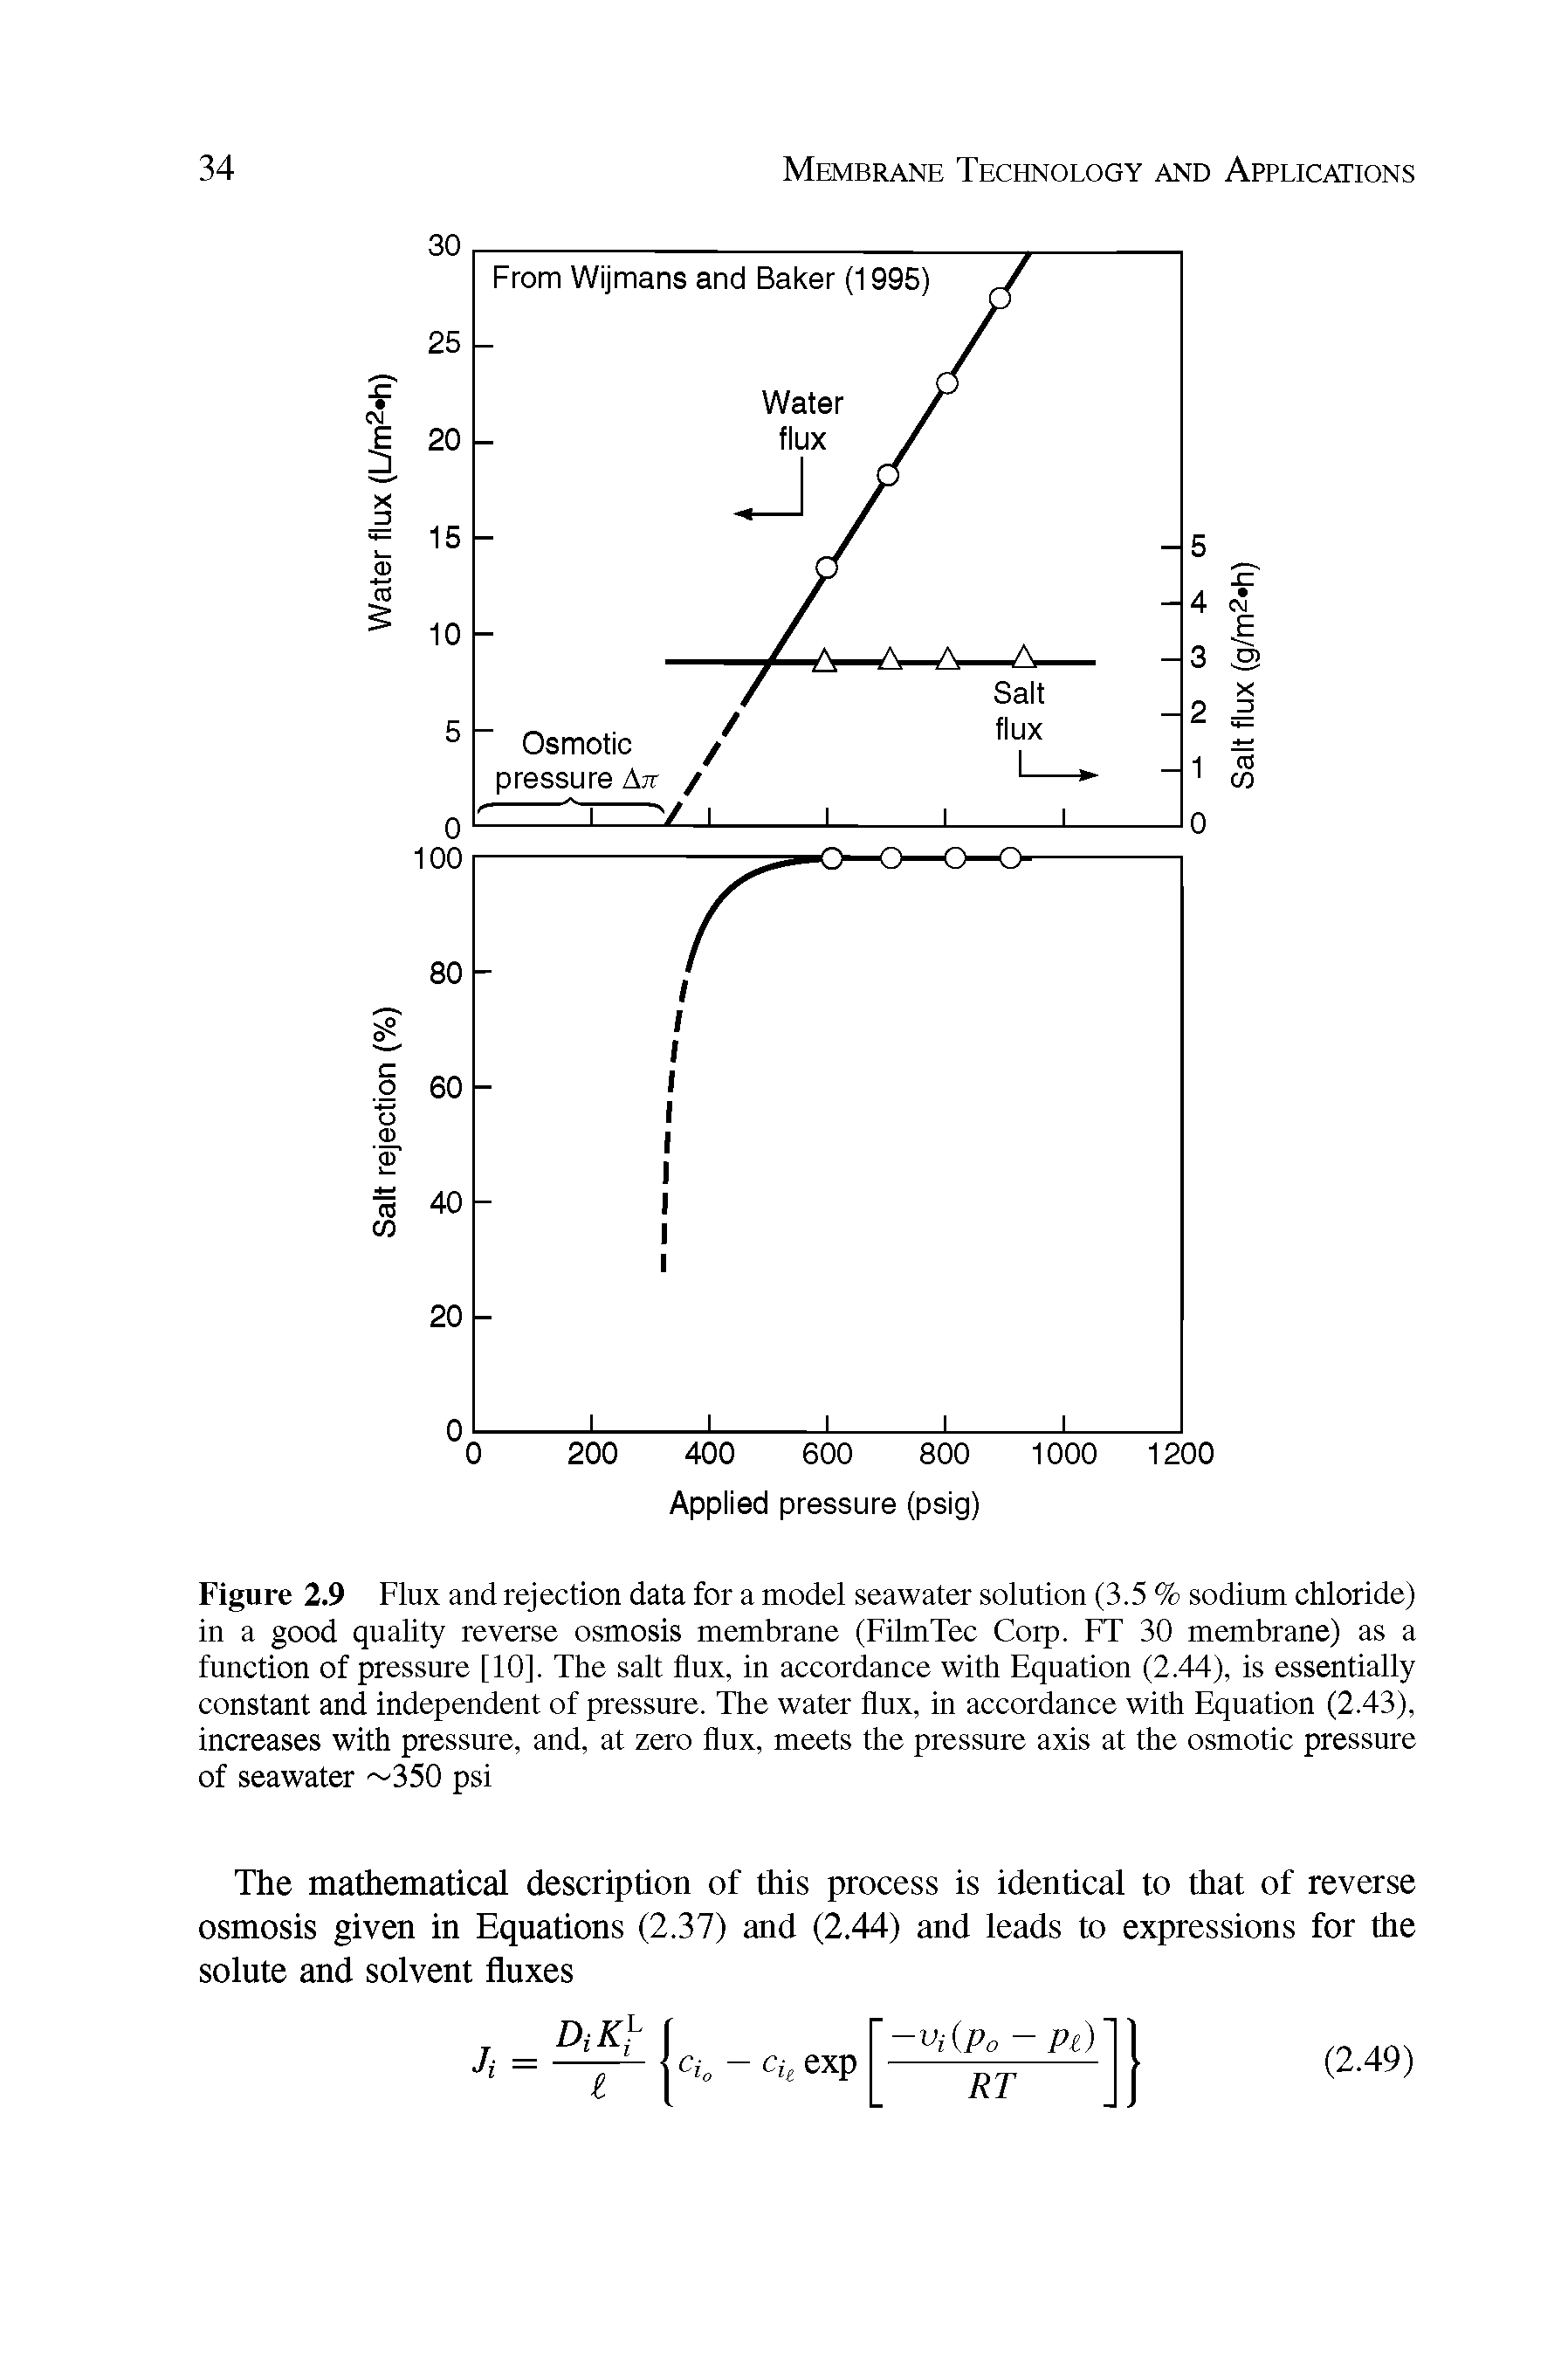 Figure 2.9 Flux and rejection data for a model seawater solution (3.5 % sodium chloride) in a good quality reverse osmosis membrane (FilmTec Corp. FT 30 membrane) as a function of pressure [10]. The salt flux, in accordance with Equation (2.44), is essentially constant and independent of pressure. The water flux, in accordance with Equation (2.43), increases with pressure, and, at zero flux, meets the pressure axis at the osmotic pressure of seawater 350 psi...